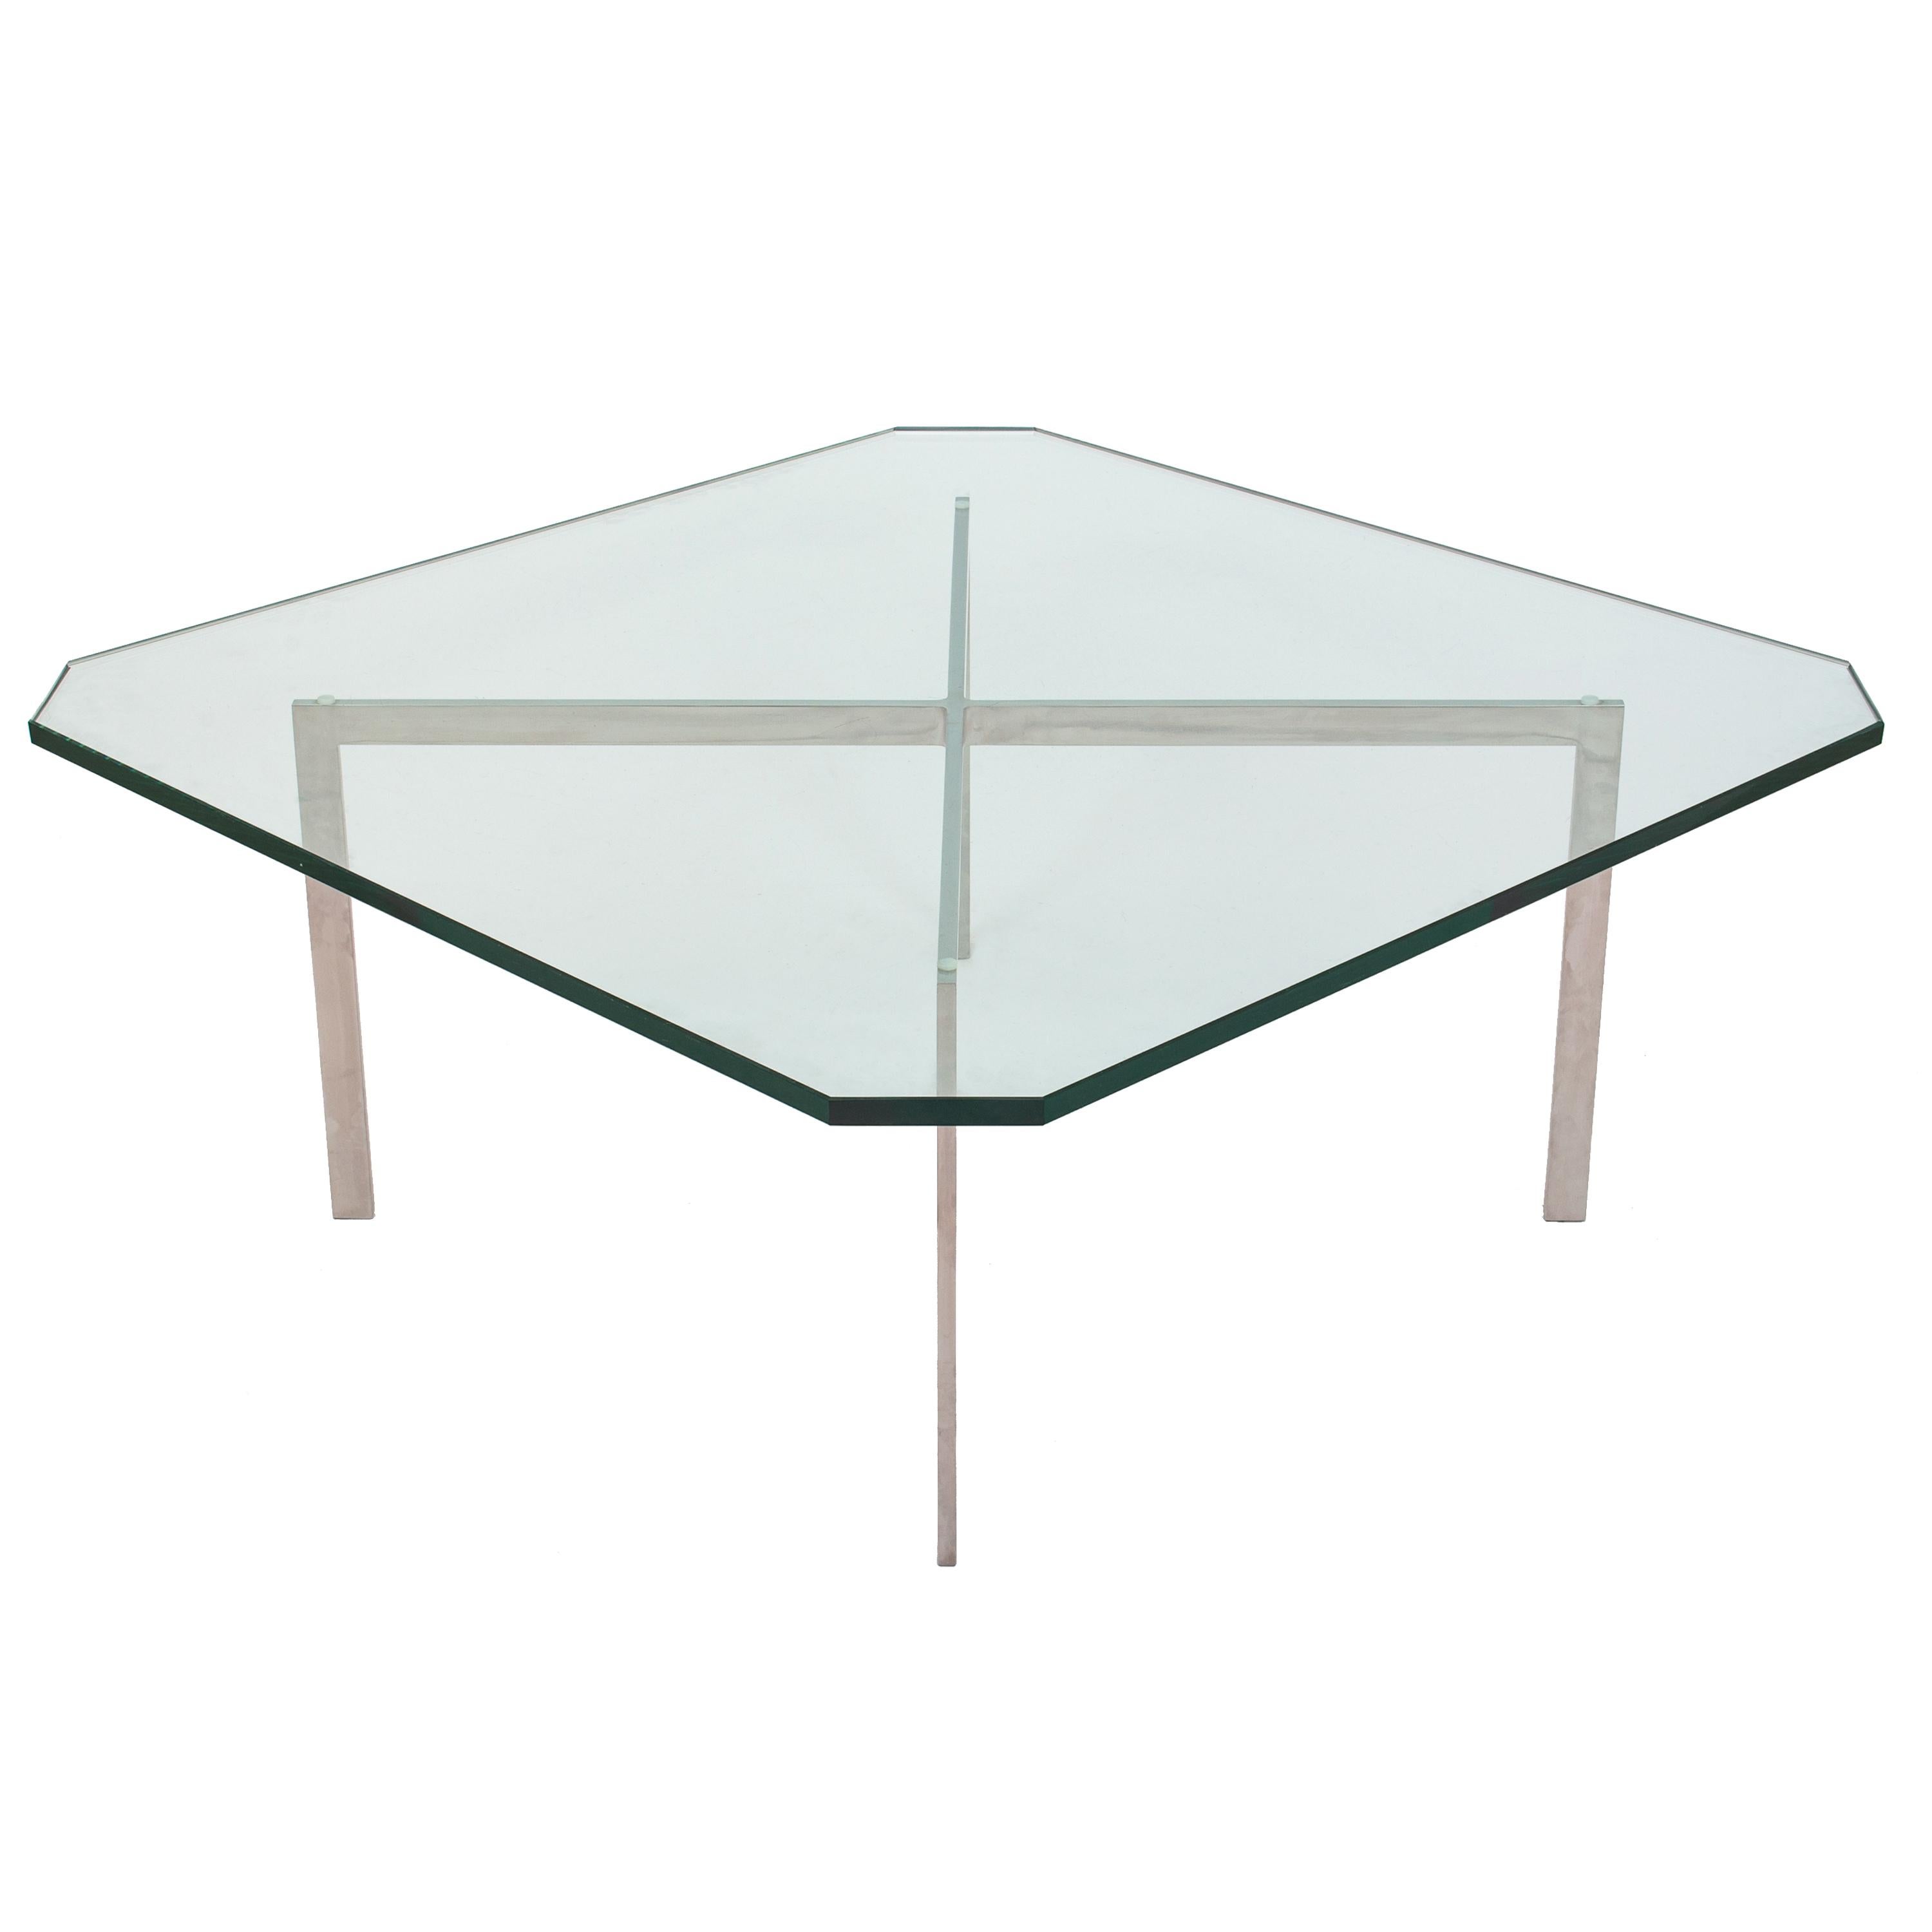 American Mid Century Glass Stainless Steel Barcelona Table Mies Van Der Rohe Knoll 1955 For Sale